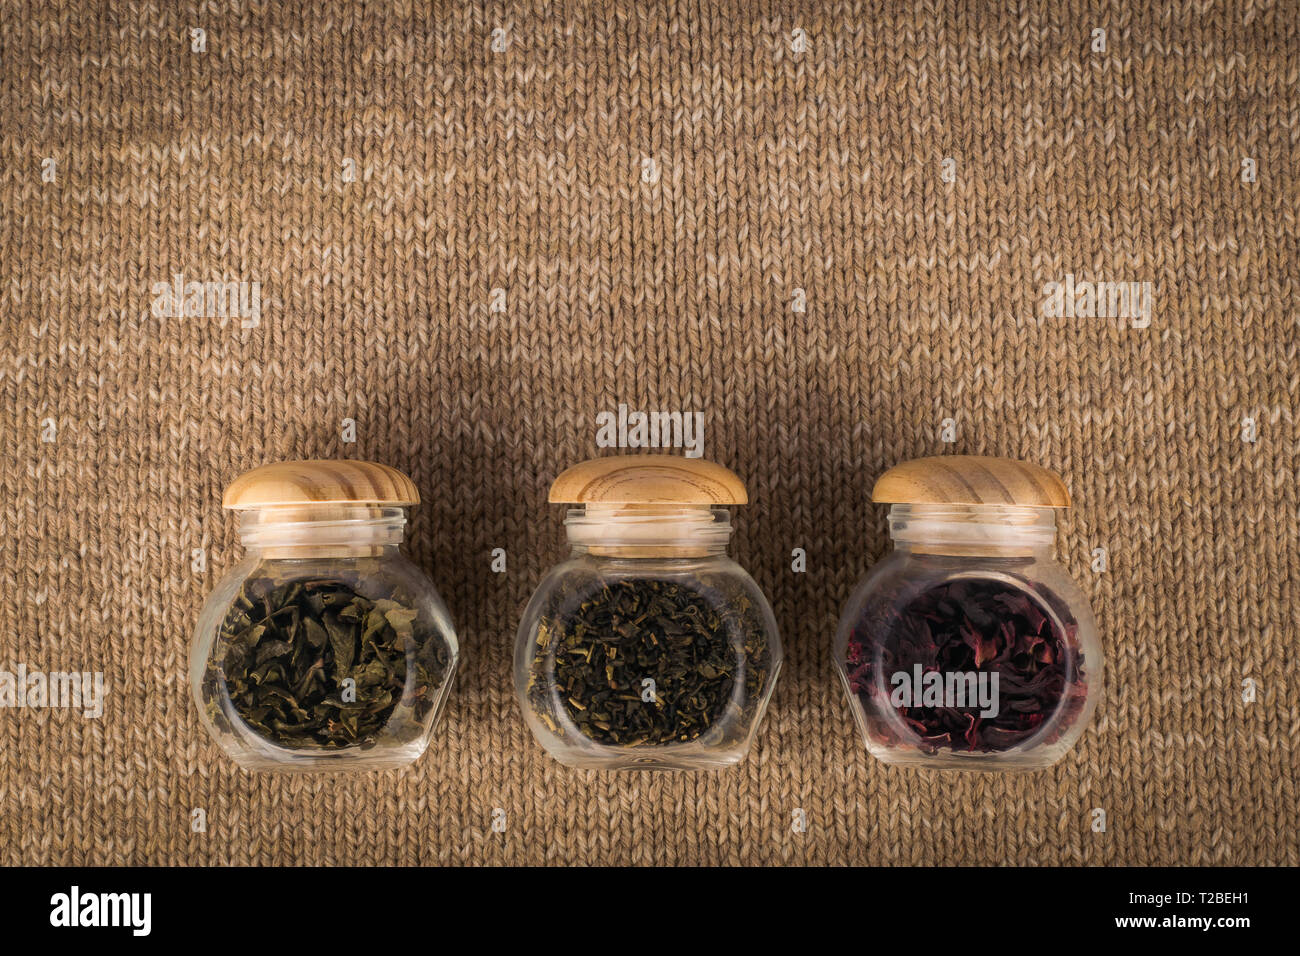 Different kinds of tea in small glass jars Stock Photo